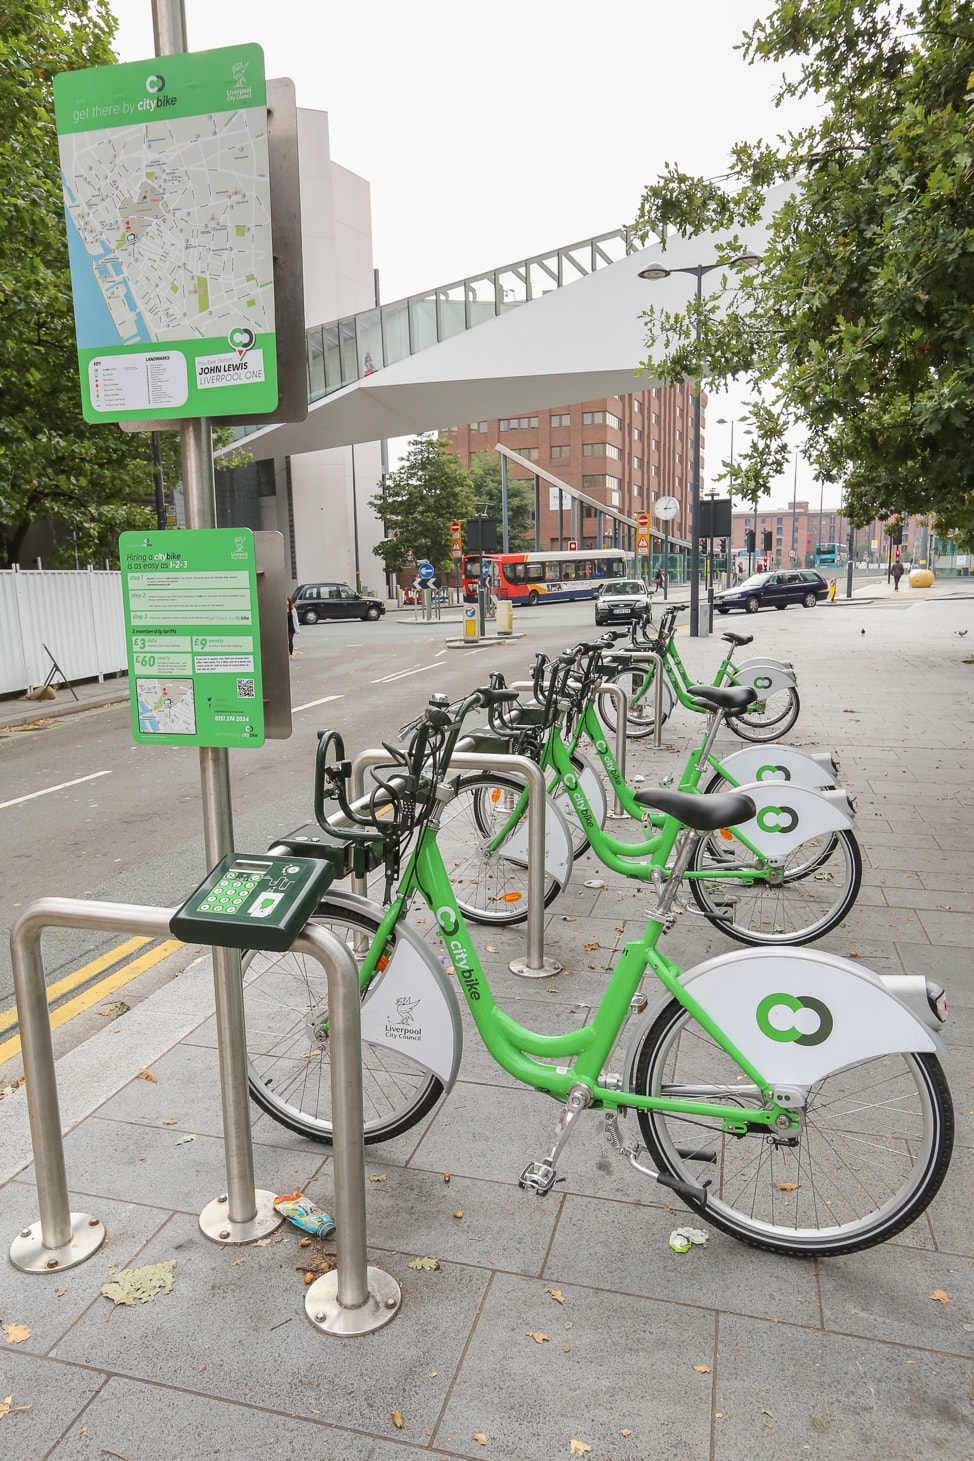 City Bike is one of the easiest—not to mention, cheapest—ways to get around Liverpool.